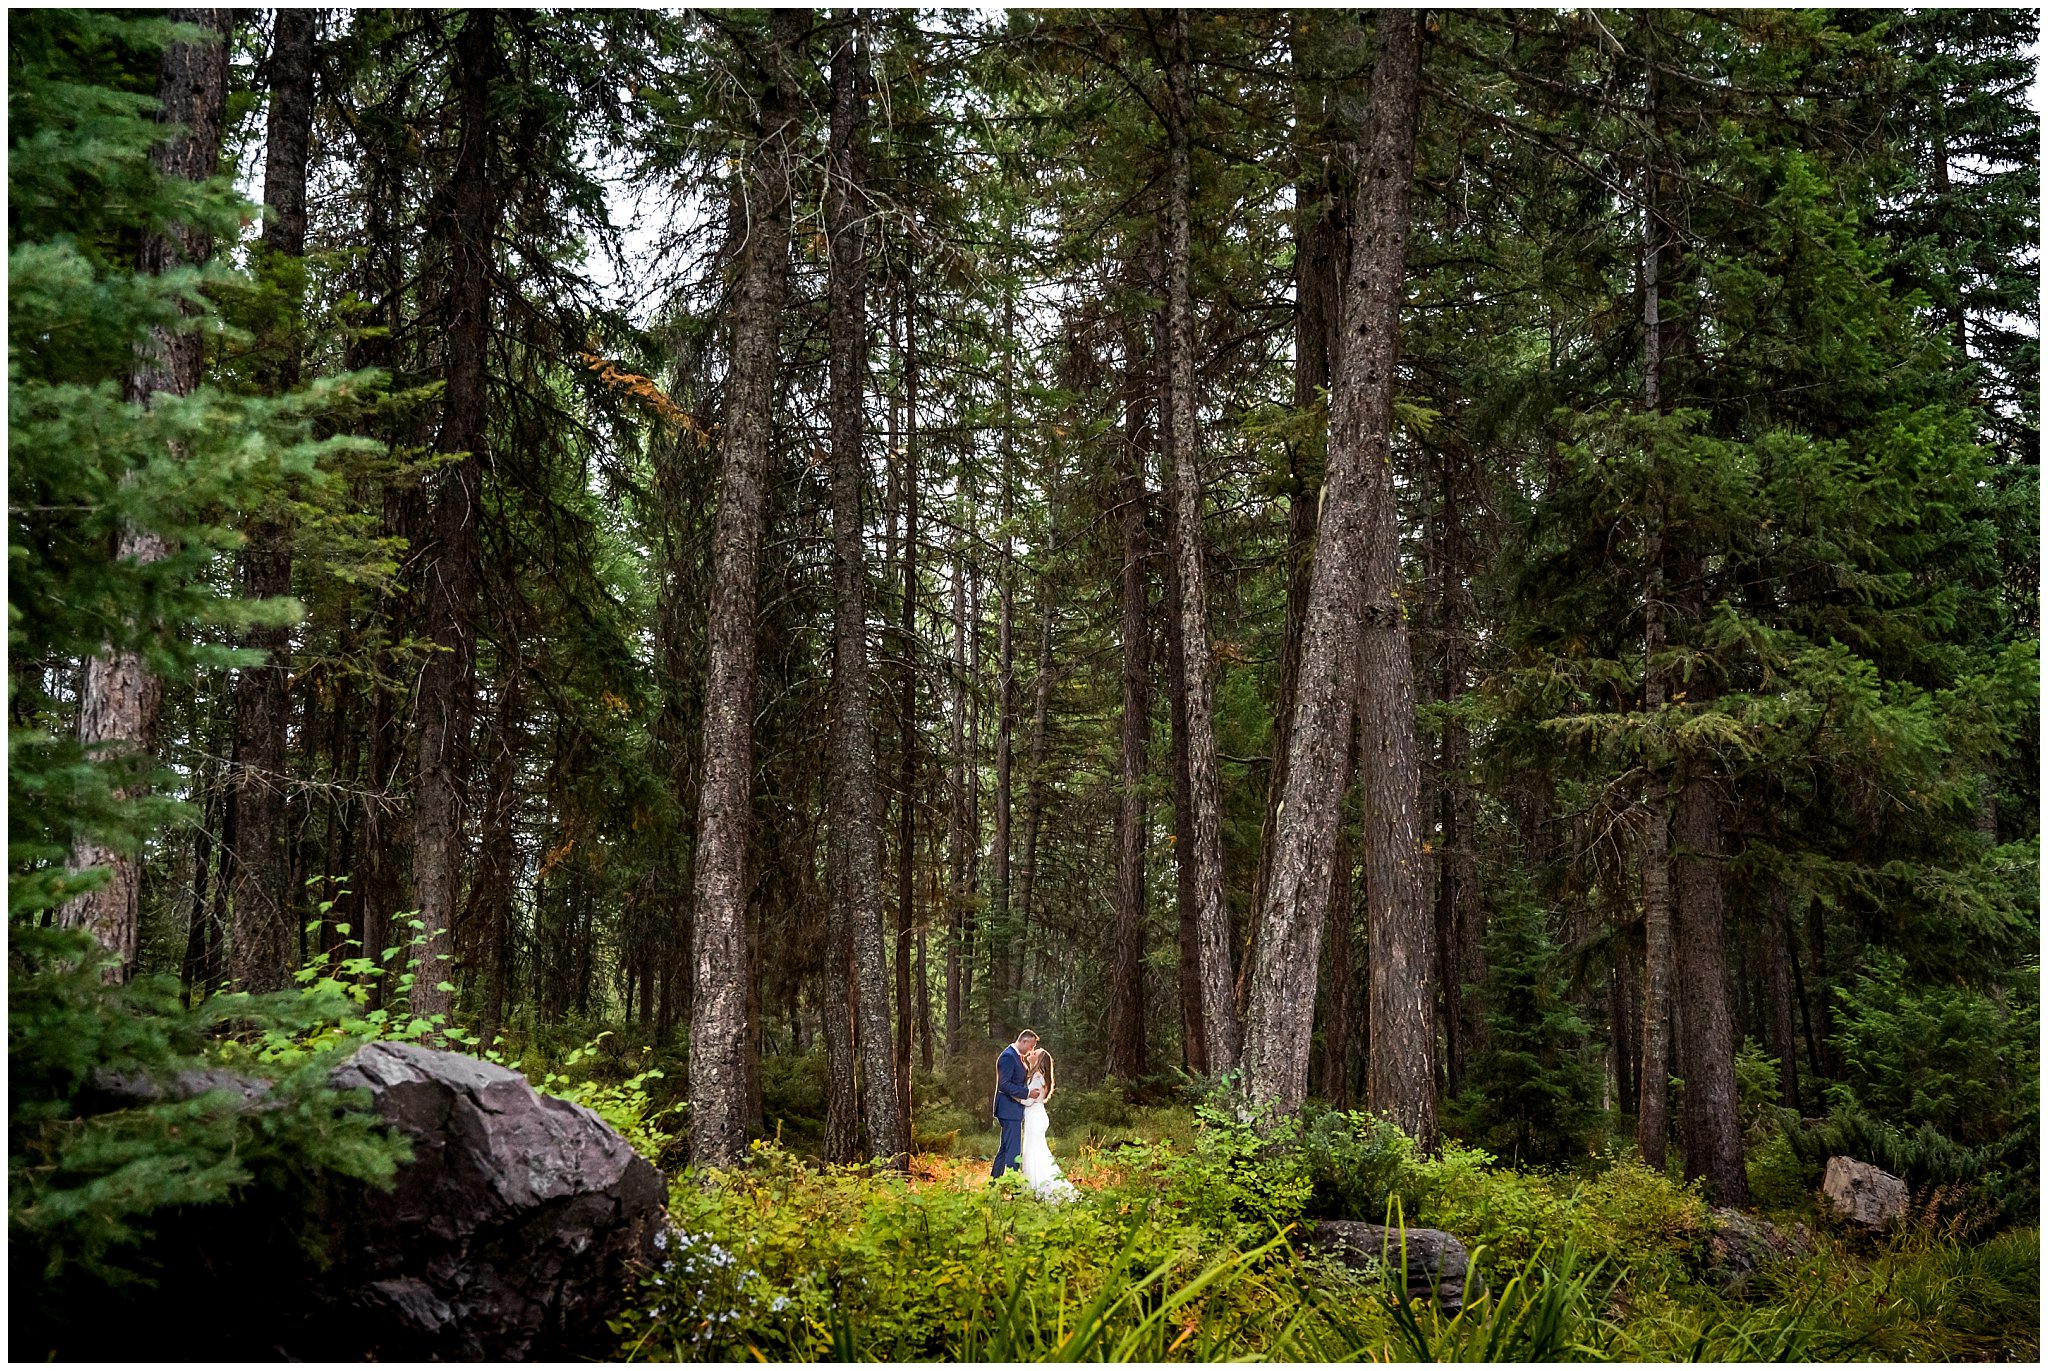 Bride and Groom portraits in the dense forest of Montana | Mountainside Weddings Kalispell Montana Destination Wedding | Jessie and Dallin Photography